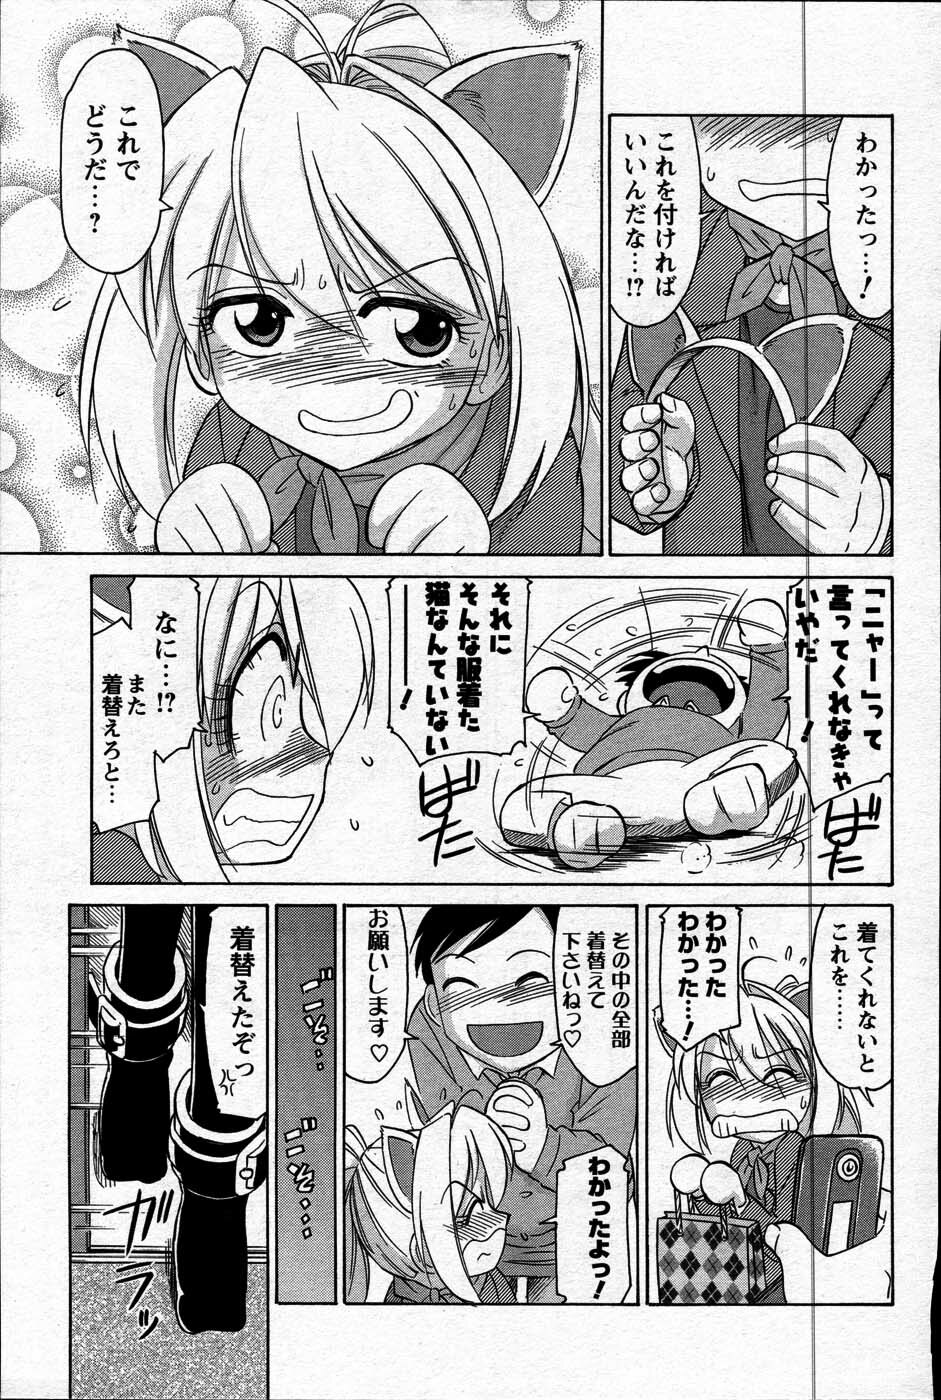 Comic Mens Young Special IKAZUCHI vol. 2 page 37 full